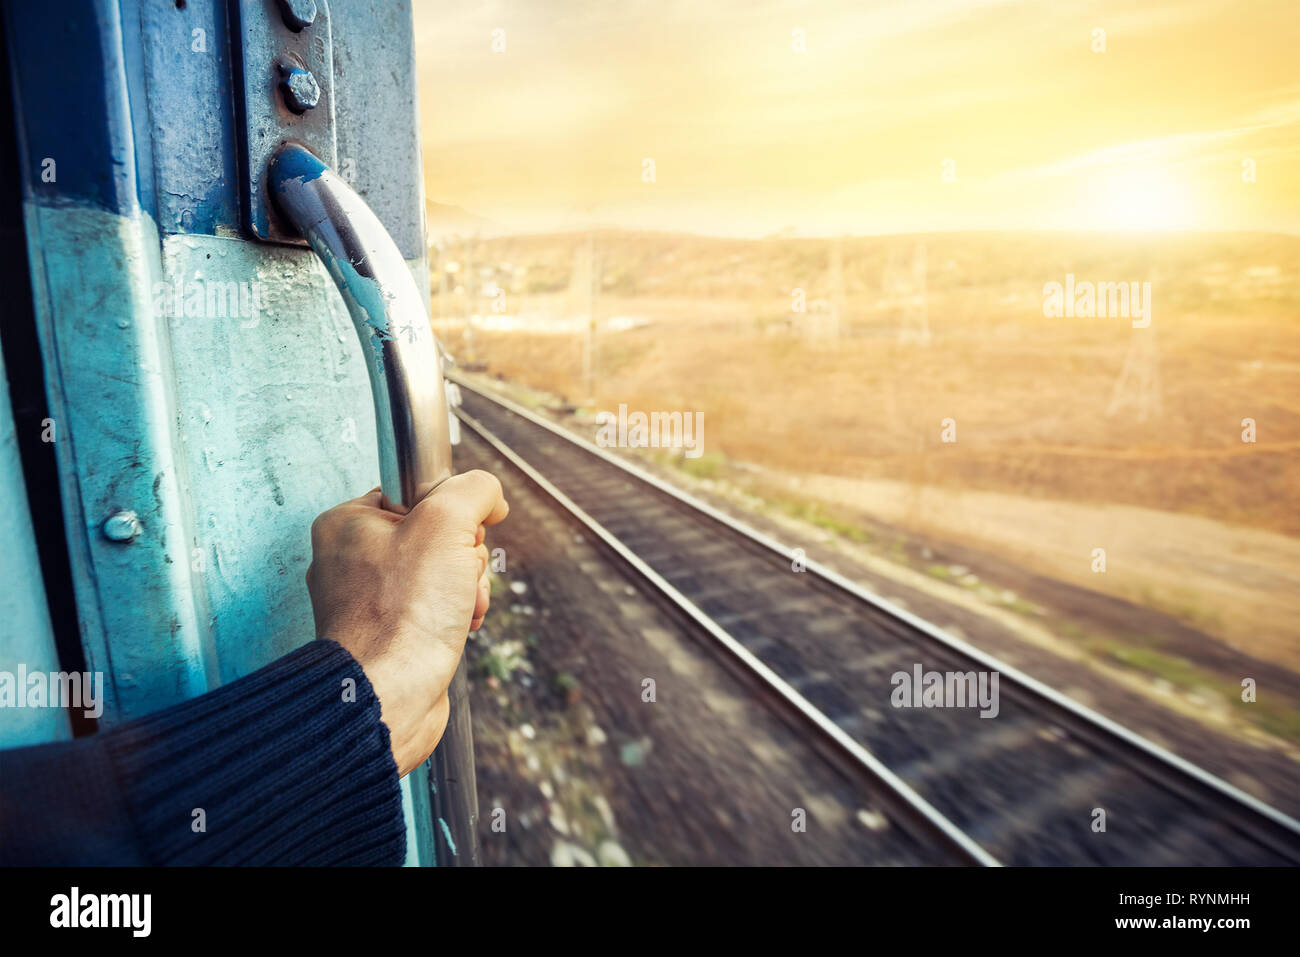 Man in the train passing desert area at sunset sky background in Rajasthan, India Stock Photo